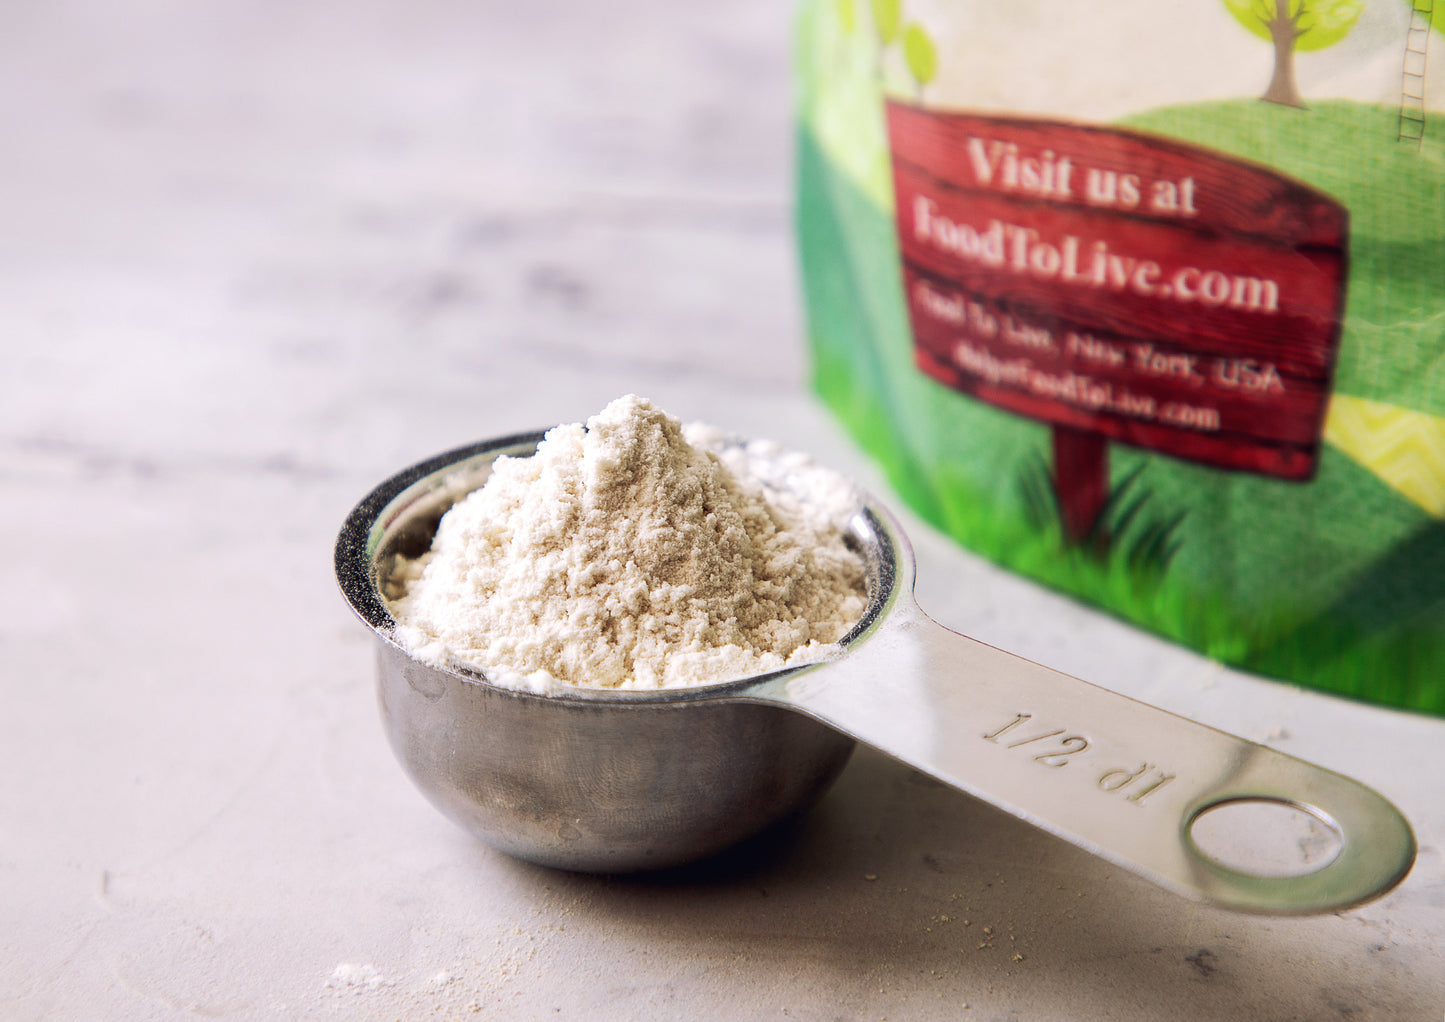 Xanthan Gum - Kosher, Vegan, Keto Friendly, Pure Powder, Great for Baking, Natural Food Thickening Agent and Stabilizer - by Food to Live